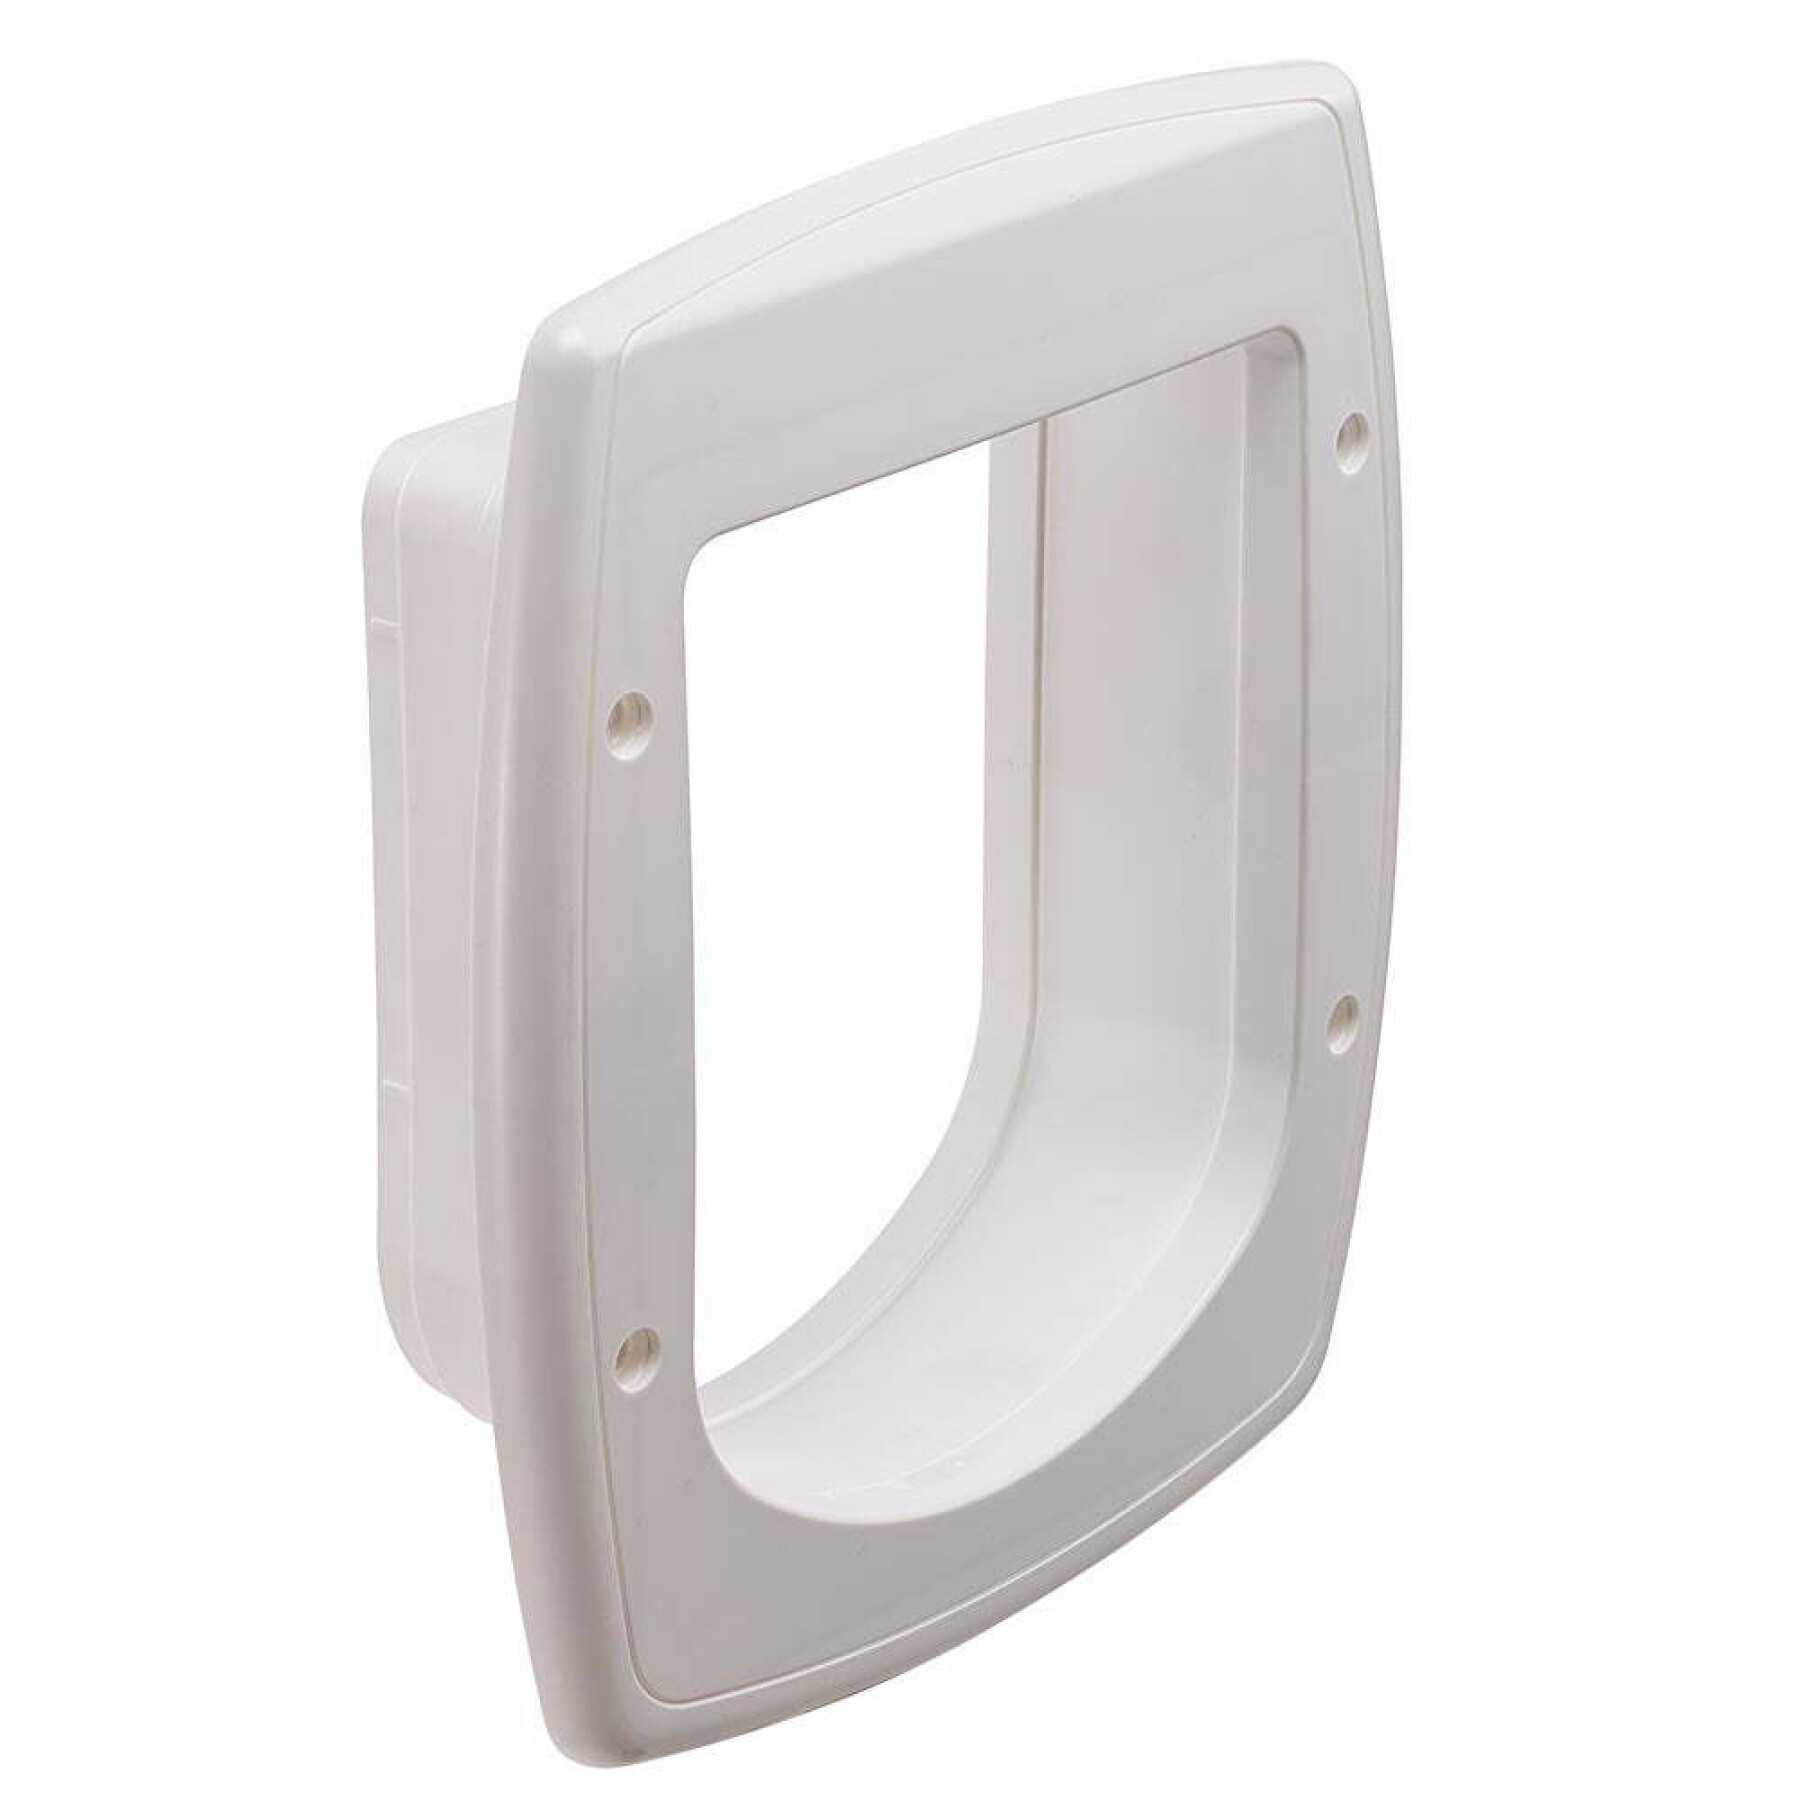 Microchip extension tunnel for cat flap Ferplast